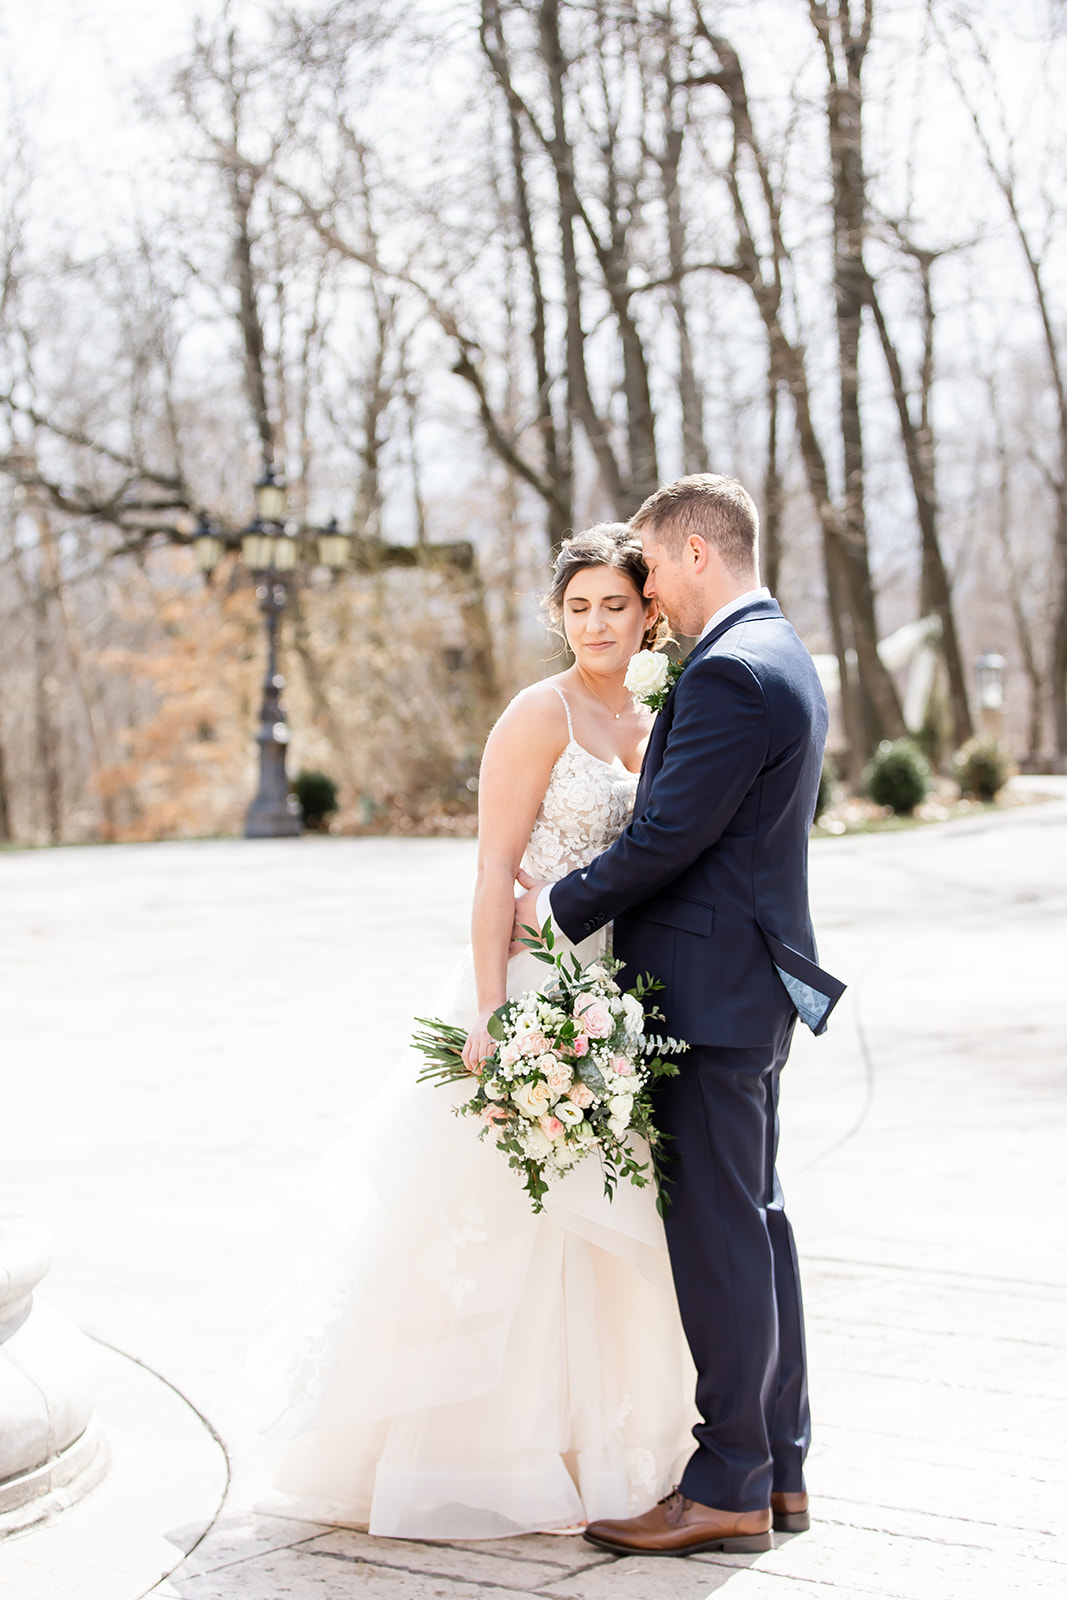 A snowy and cold wedding at Bella Amore Enchanted Acres